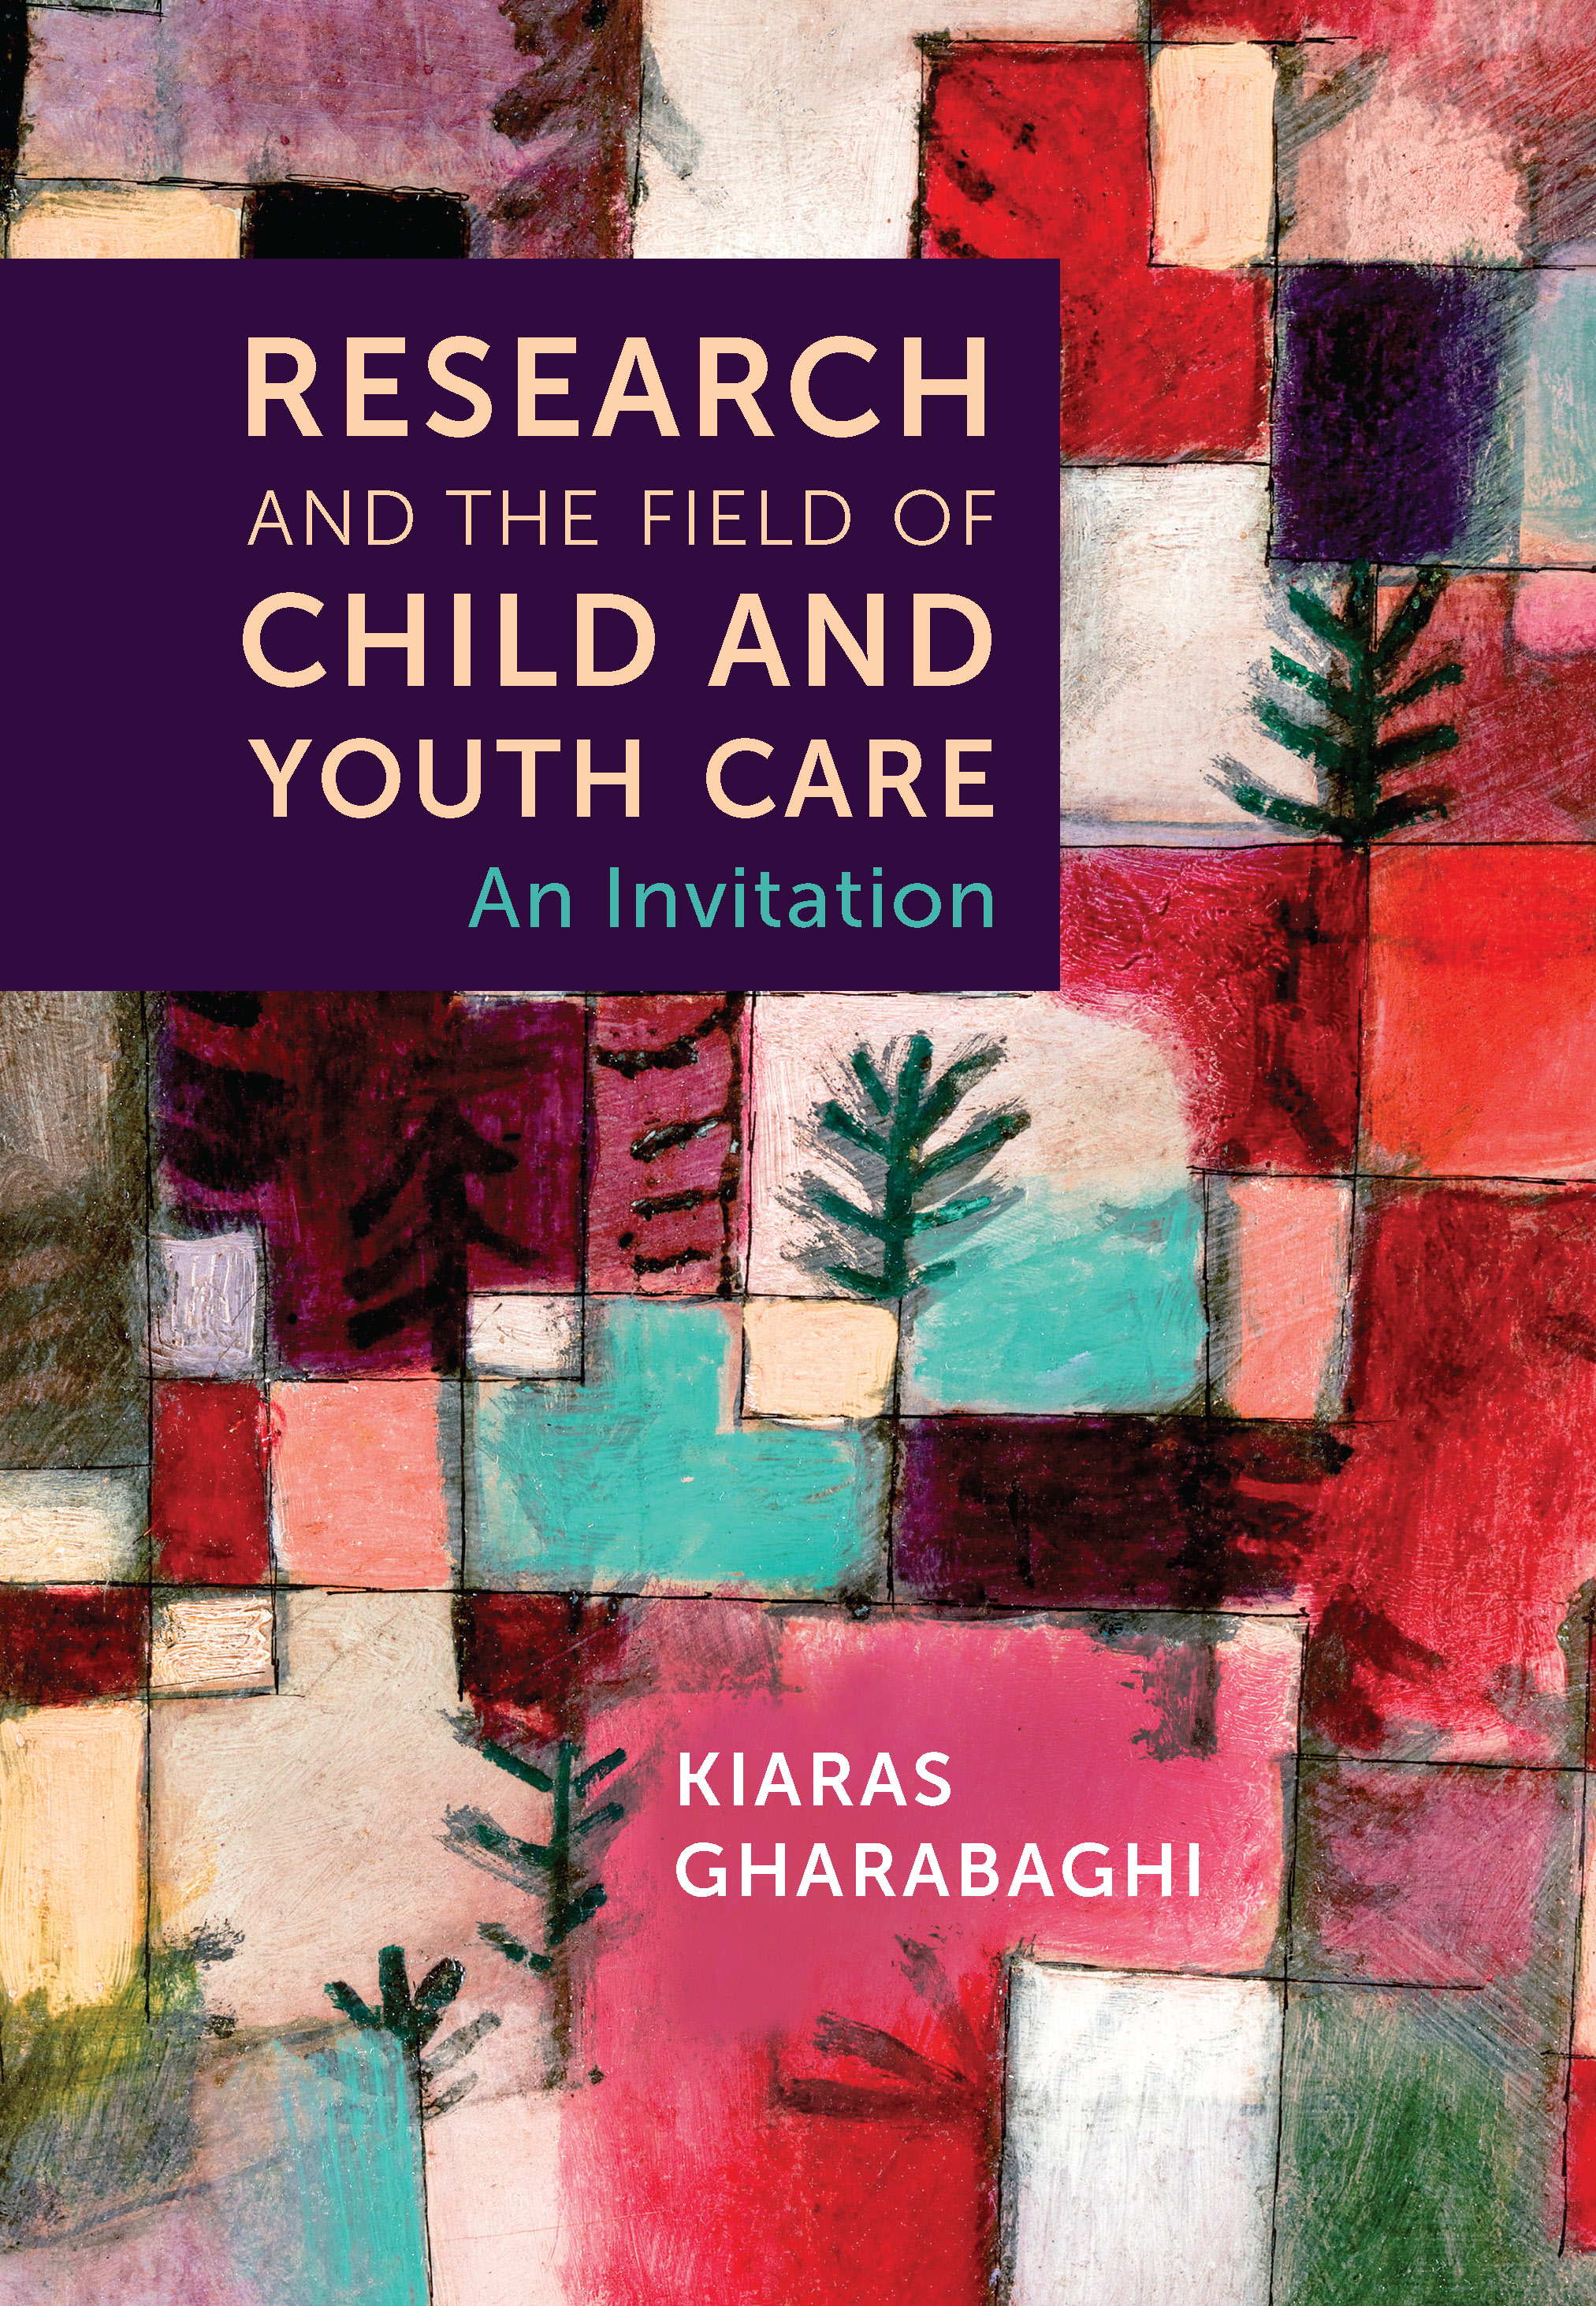 Canadian　Care　Scholars　the　Field　of　and　Child　Youth　Research　and